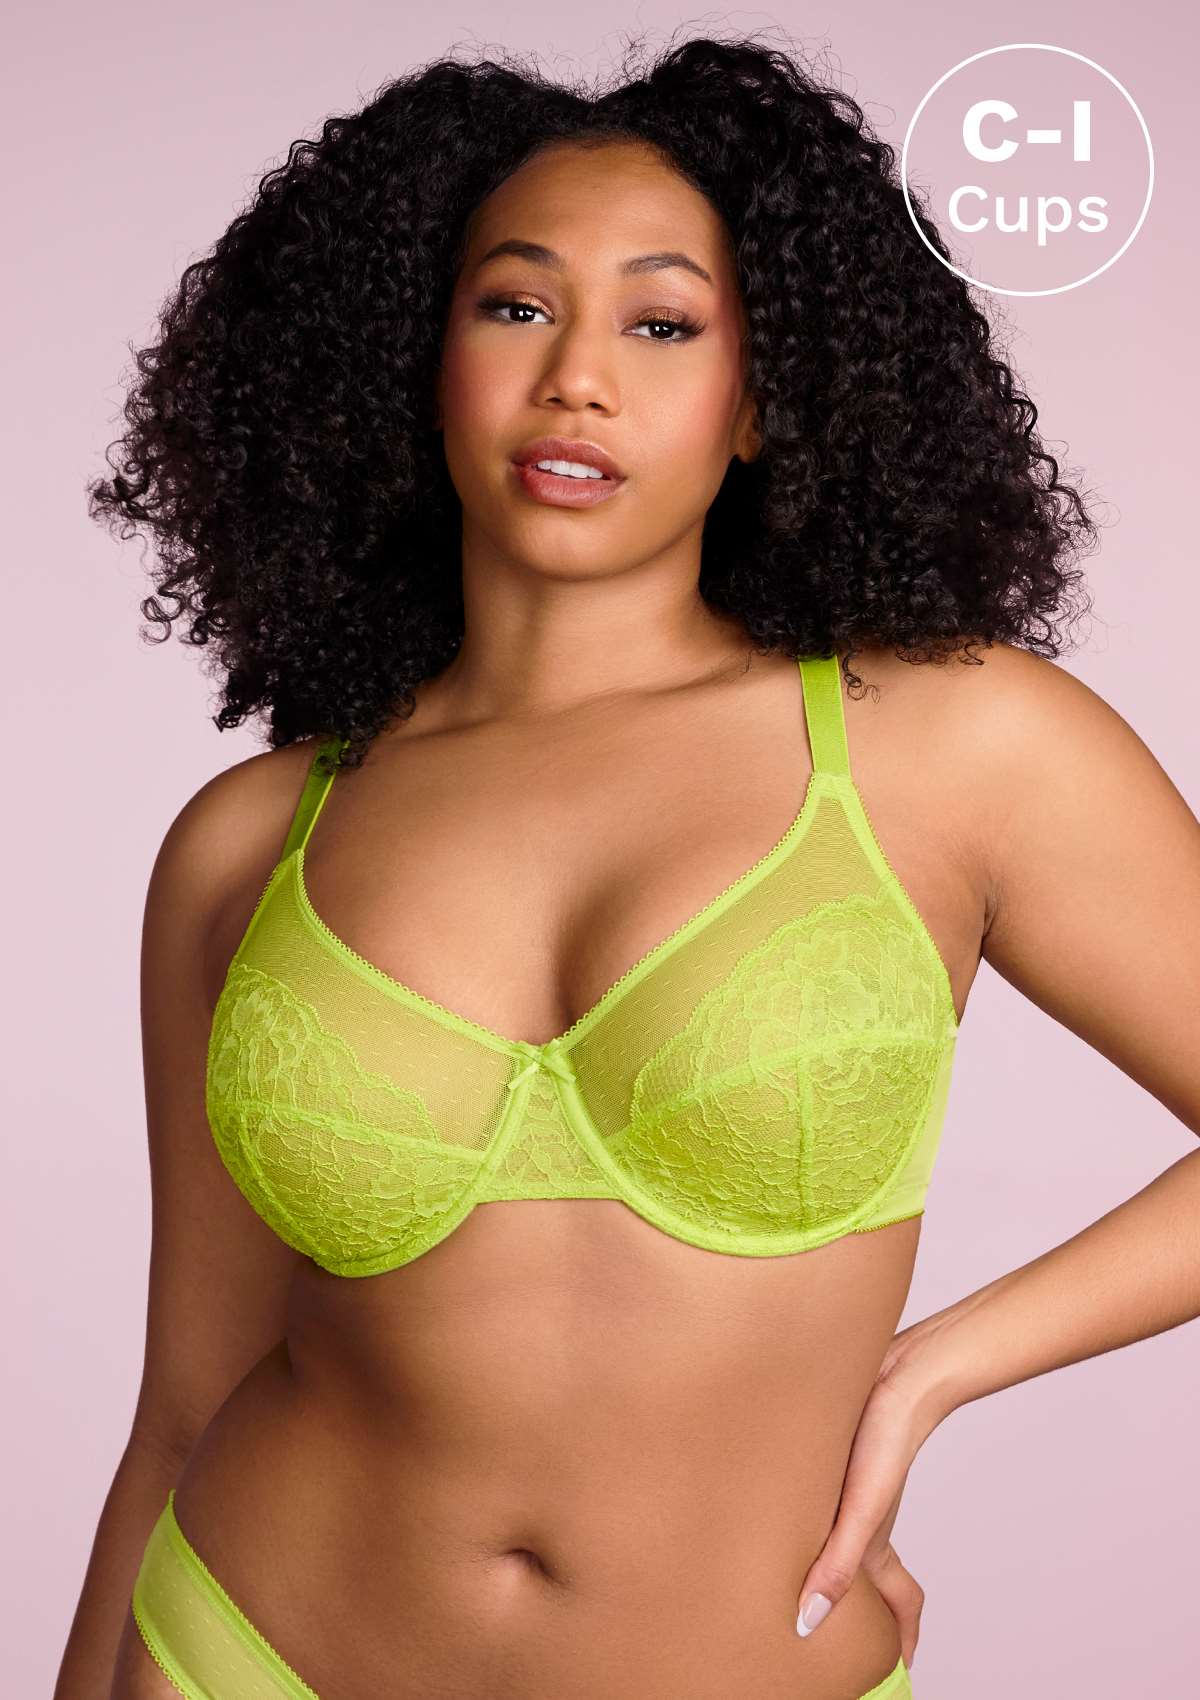 HSIA Enchante Full Cup Minimizing Bra: Supportive Unlined Lace Bra - Lime Green / 36 / DD/E